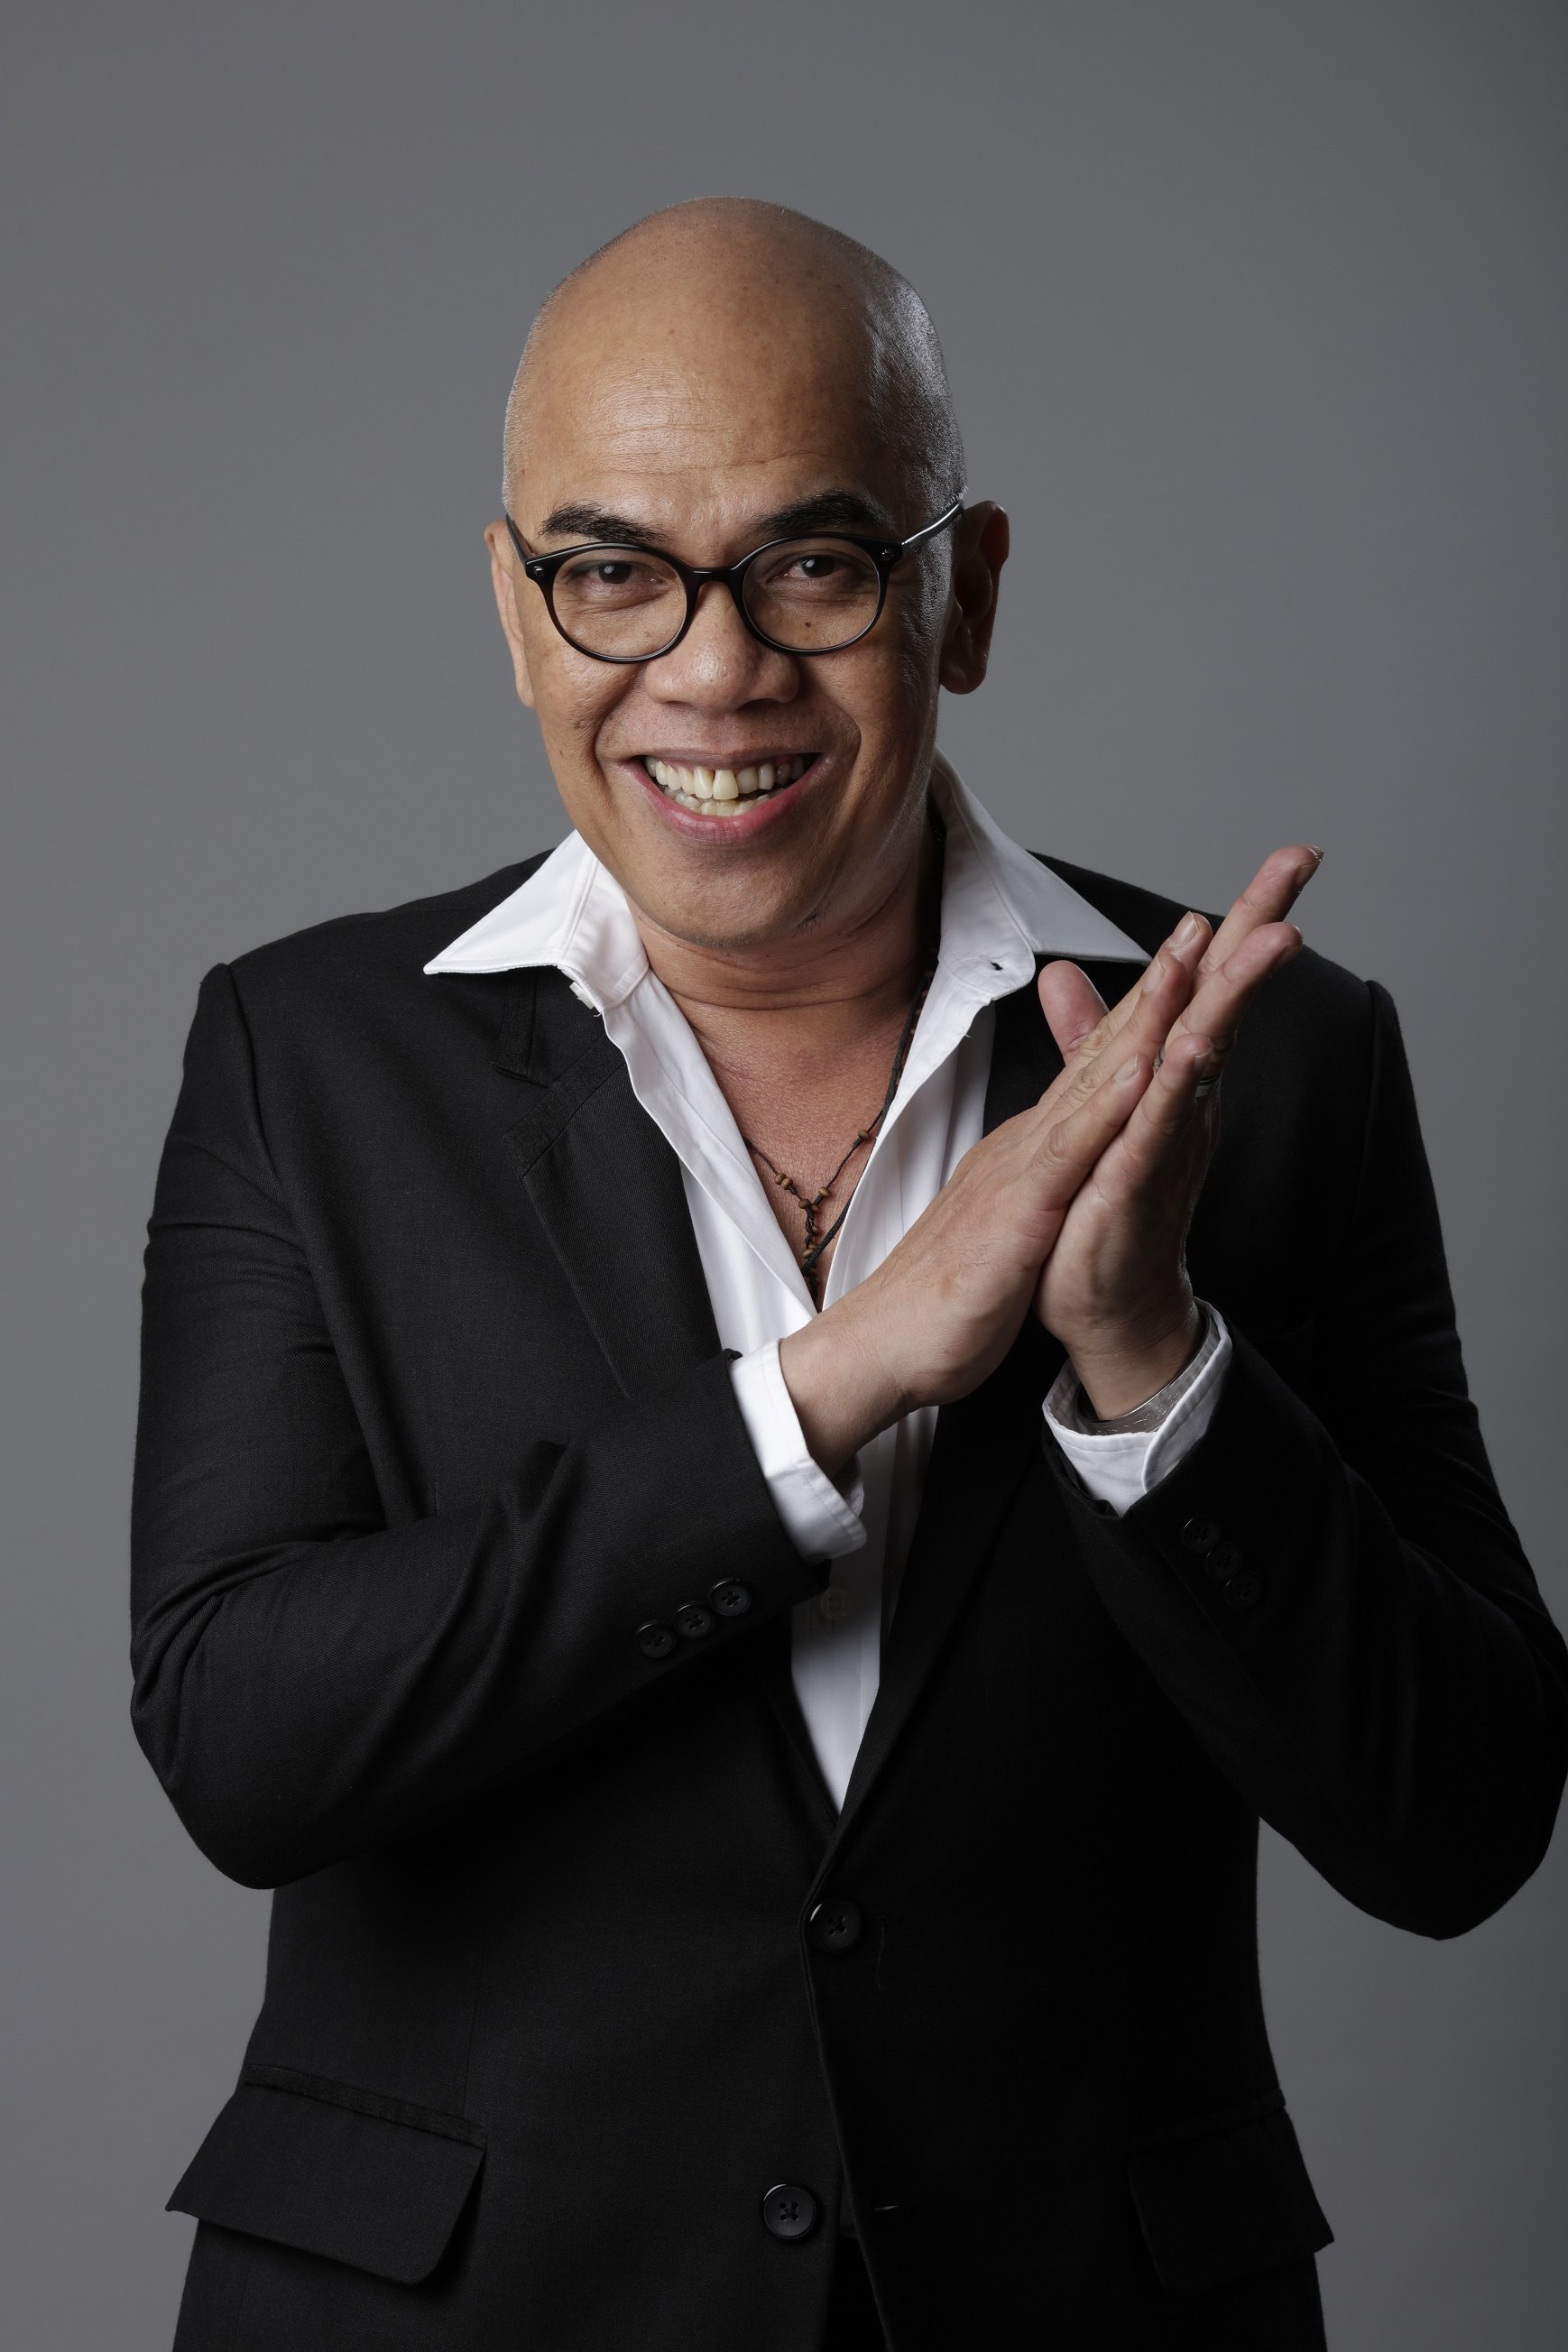 Boy Abunda excited to discover new talent in ‘The Best Talk’ season 2